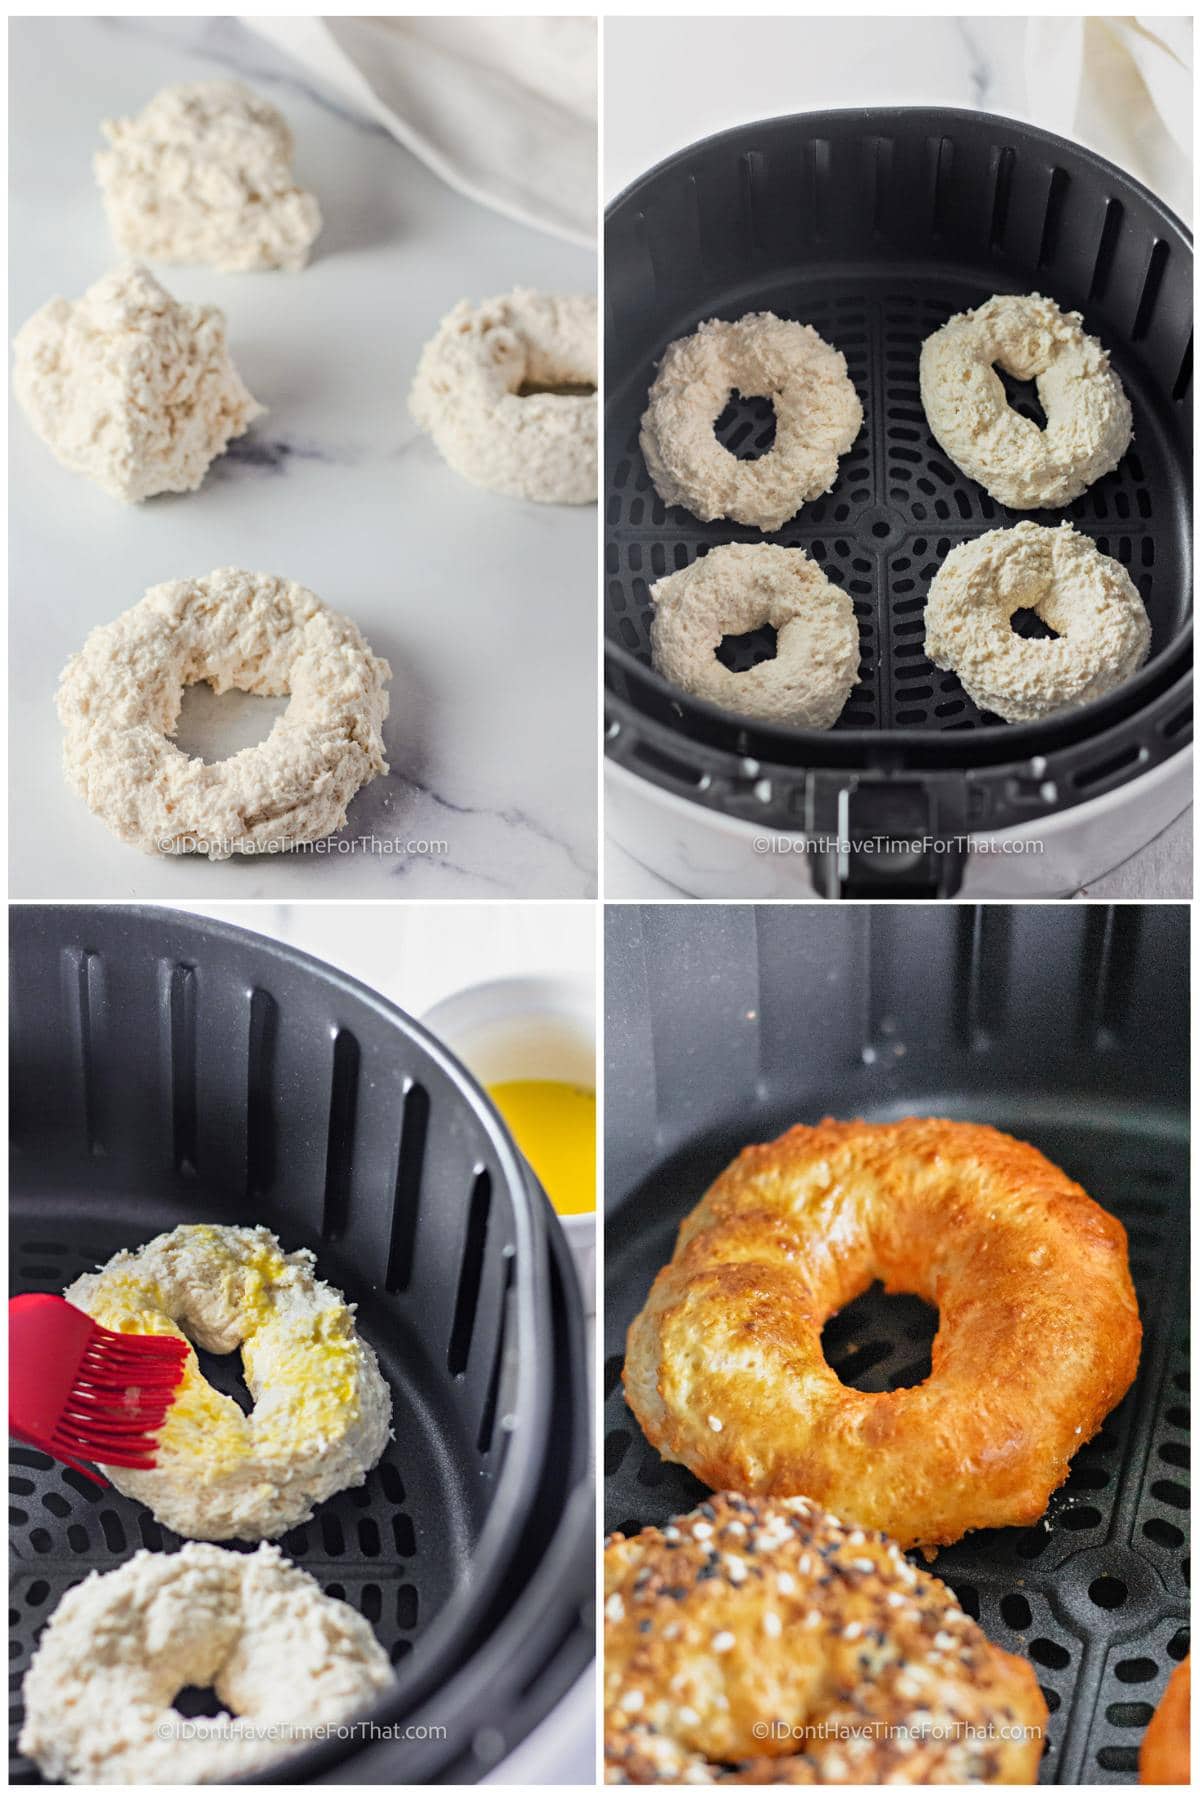 process of adding Air Fryer Bagels to fryer and cooking